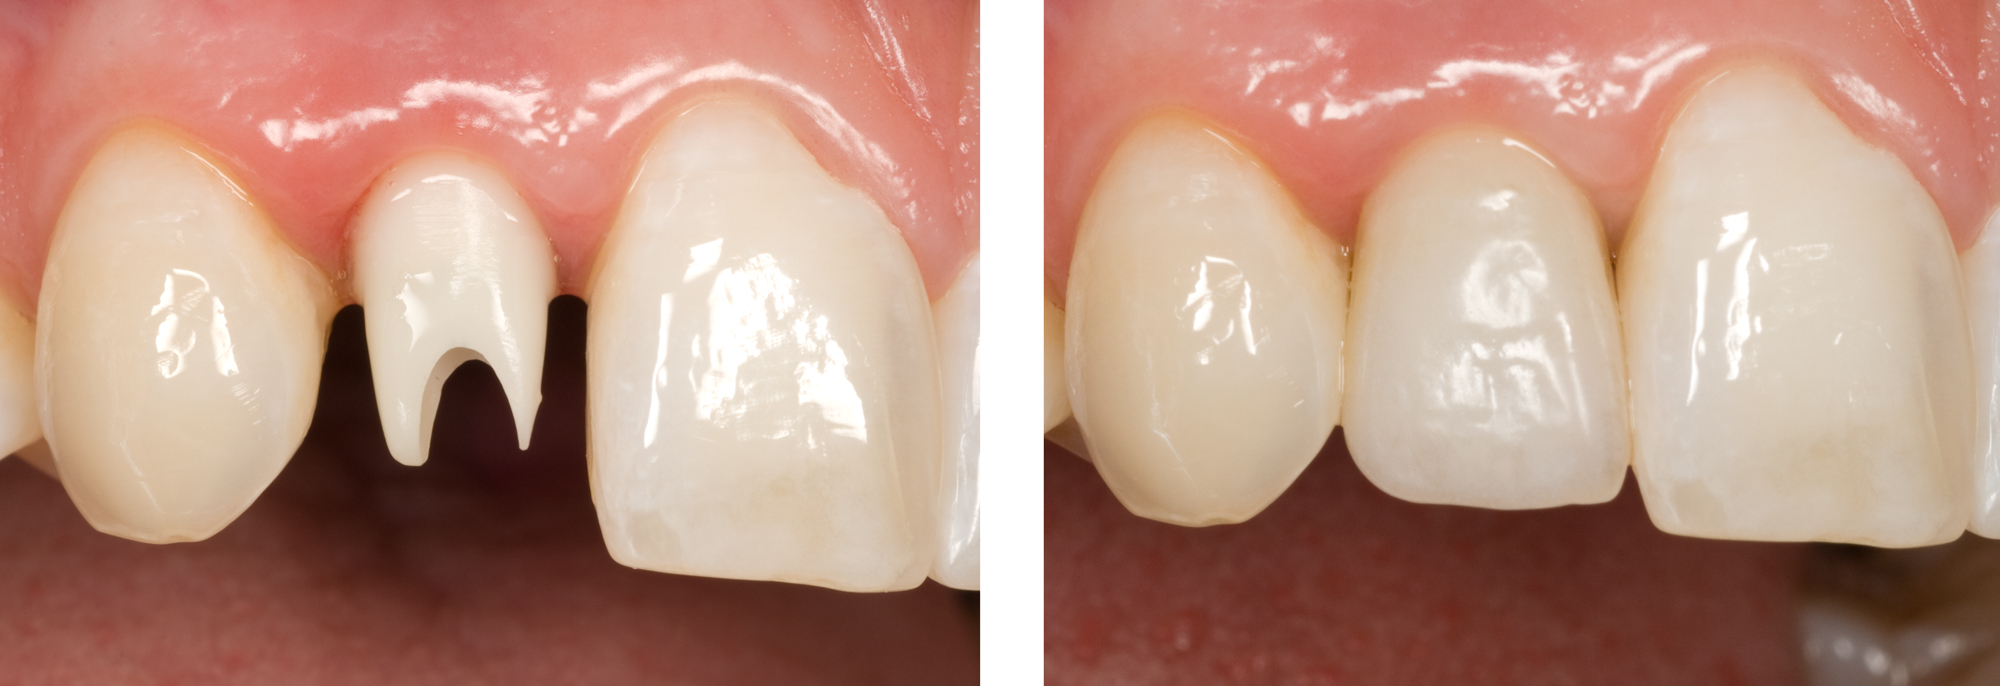 Double-Image-Base-Before--After-Zi-Implant-and-Emax-crown ron winter of fabulous teeth @ seaside dental laboratory & clinic Takapuna Auckland New Zealand .jpg